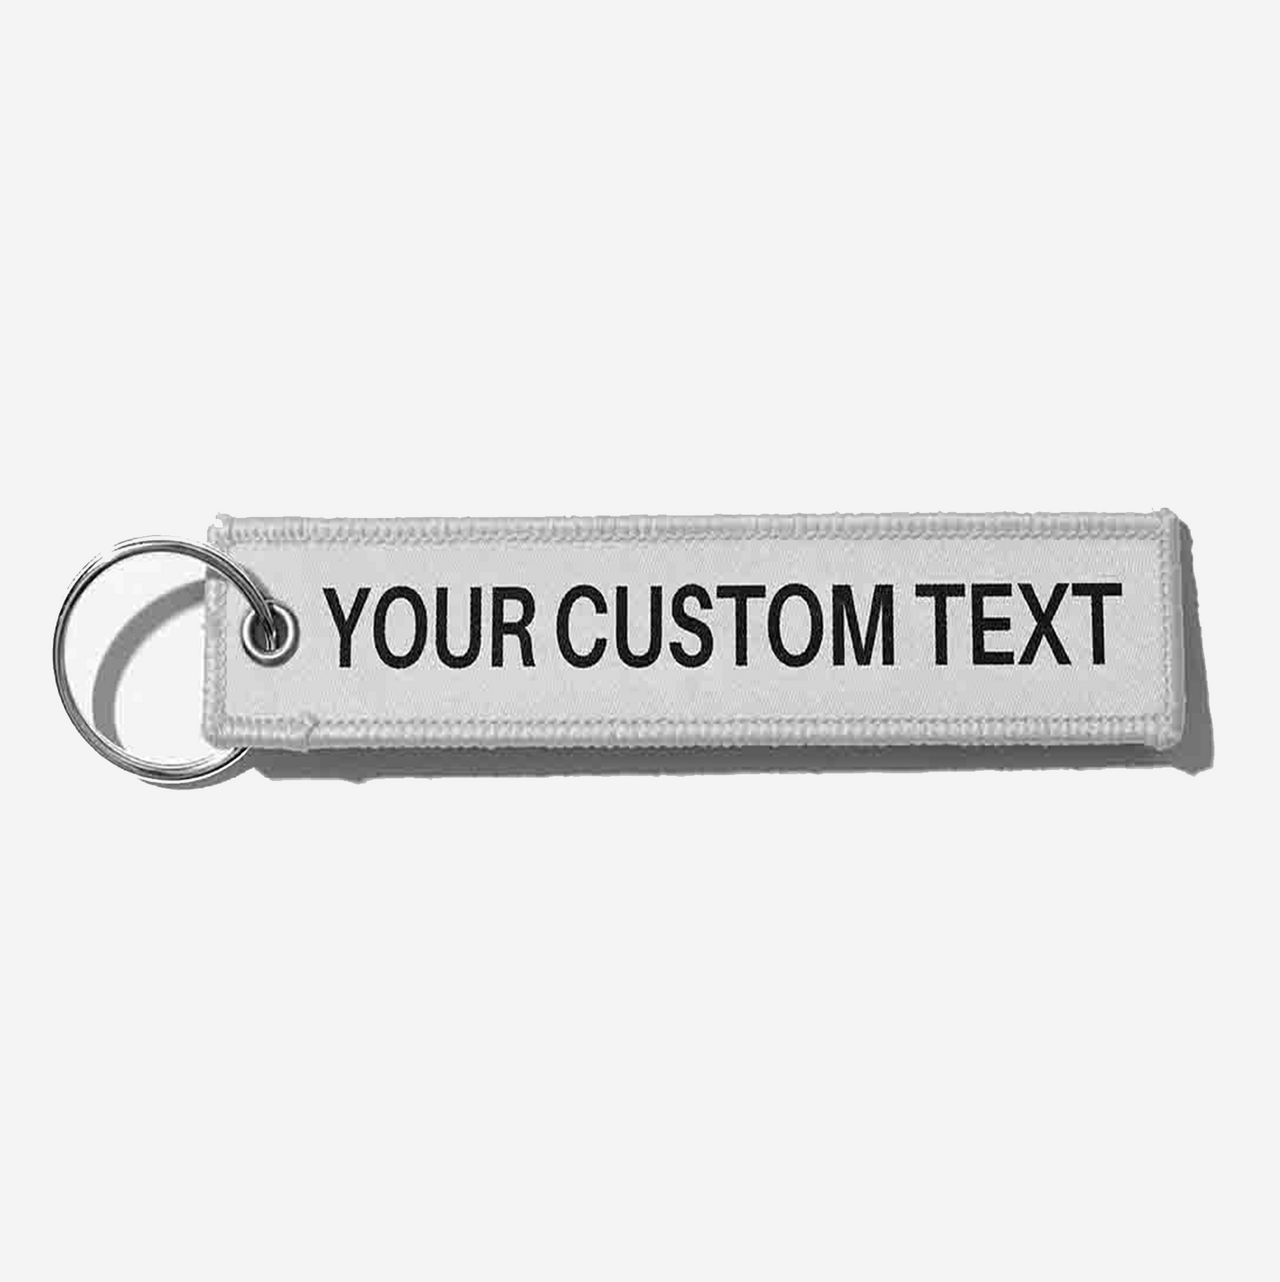 Your Custom Text Designed Key Chains